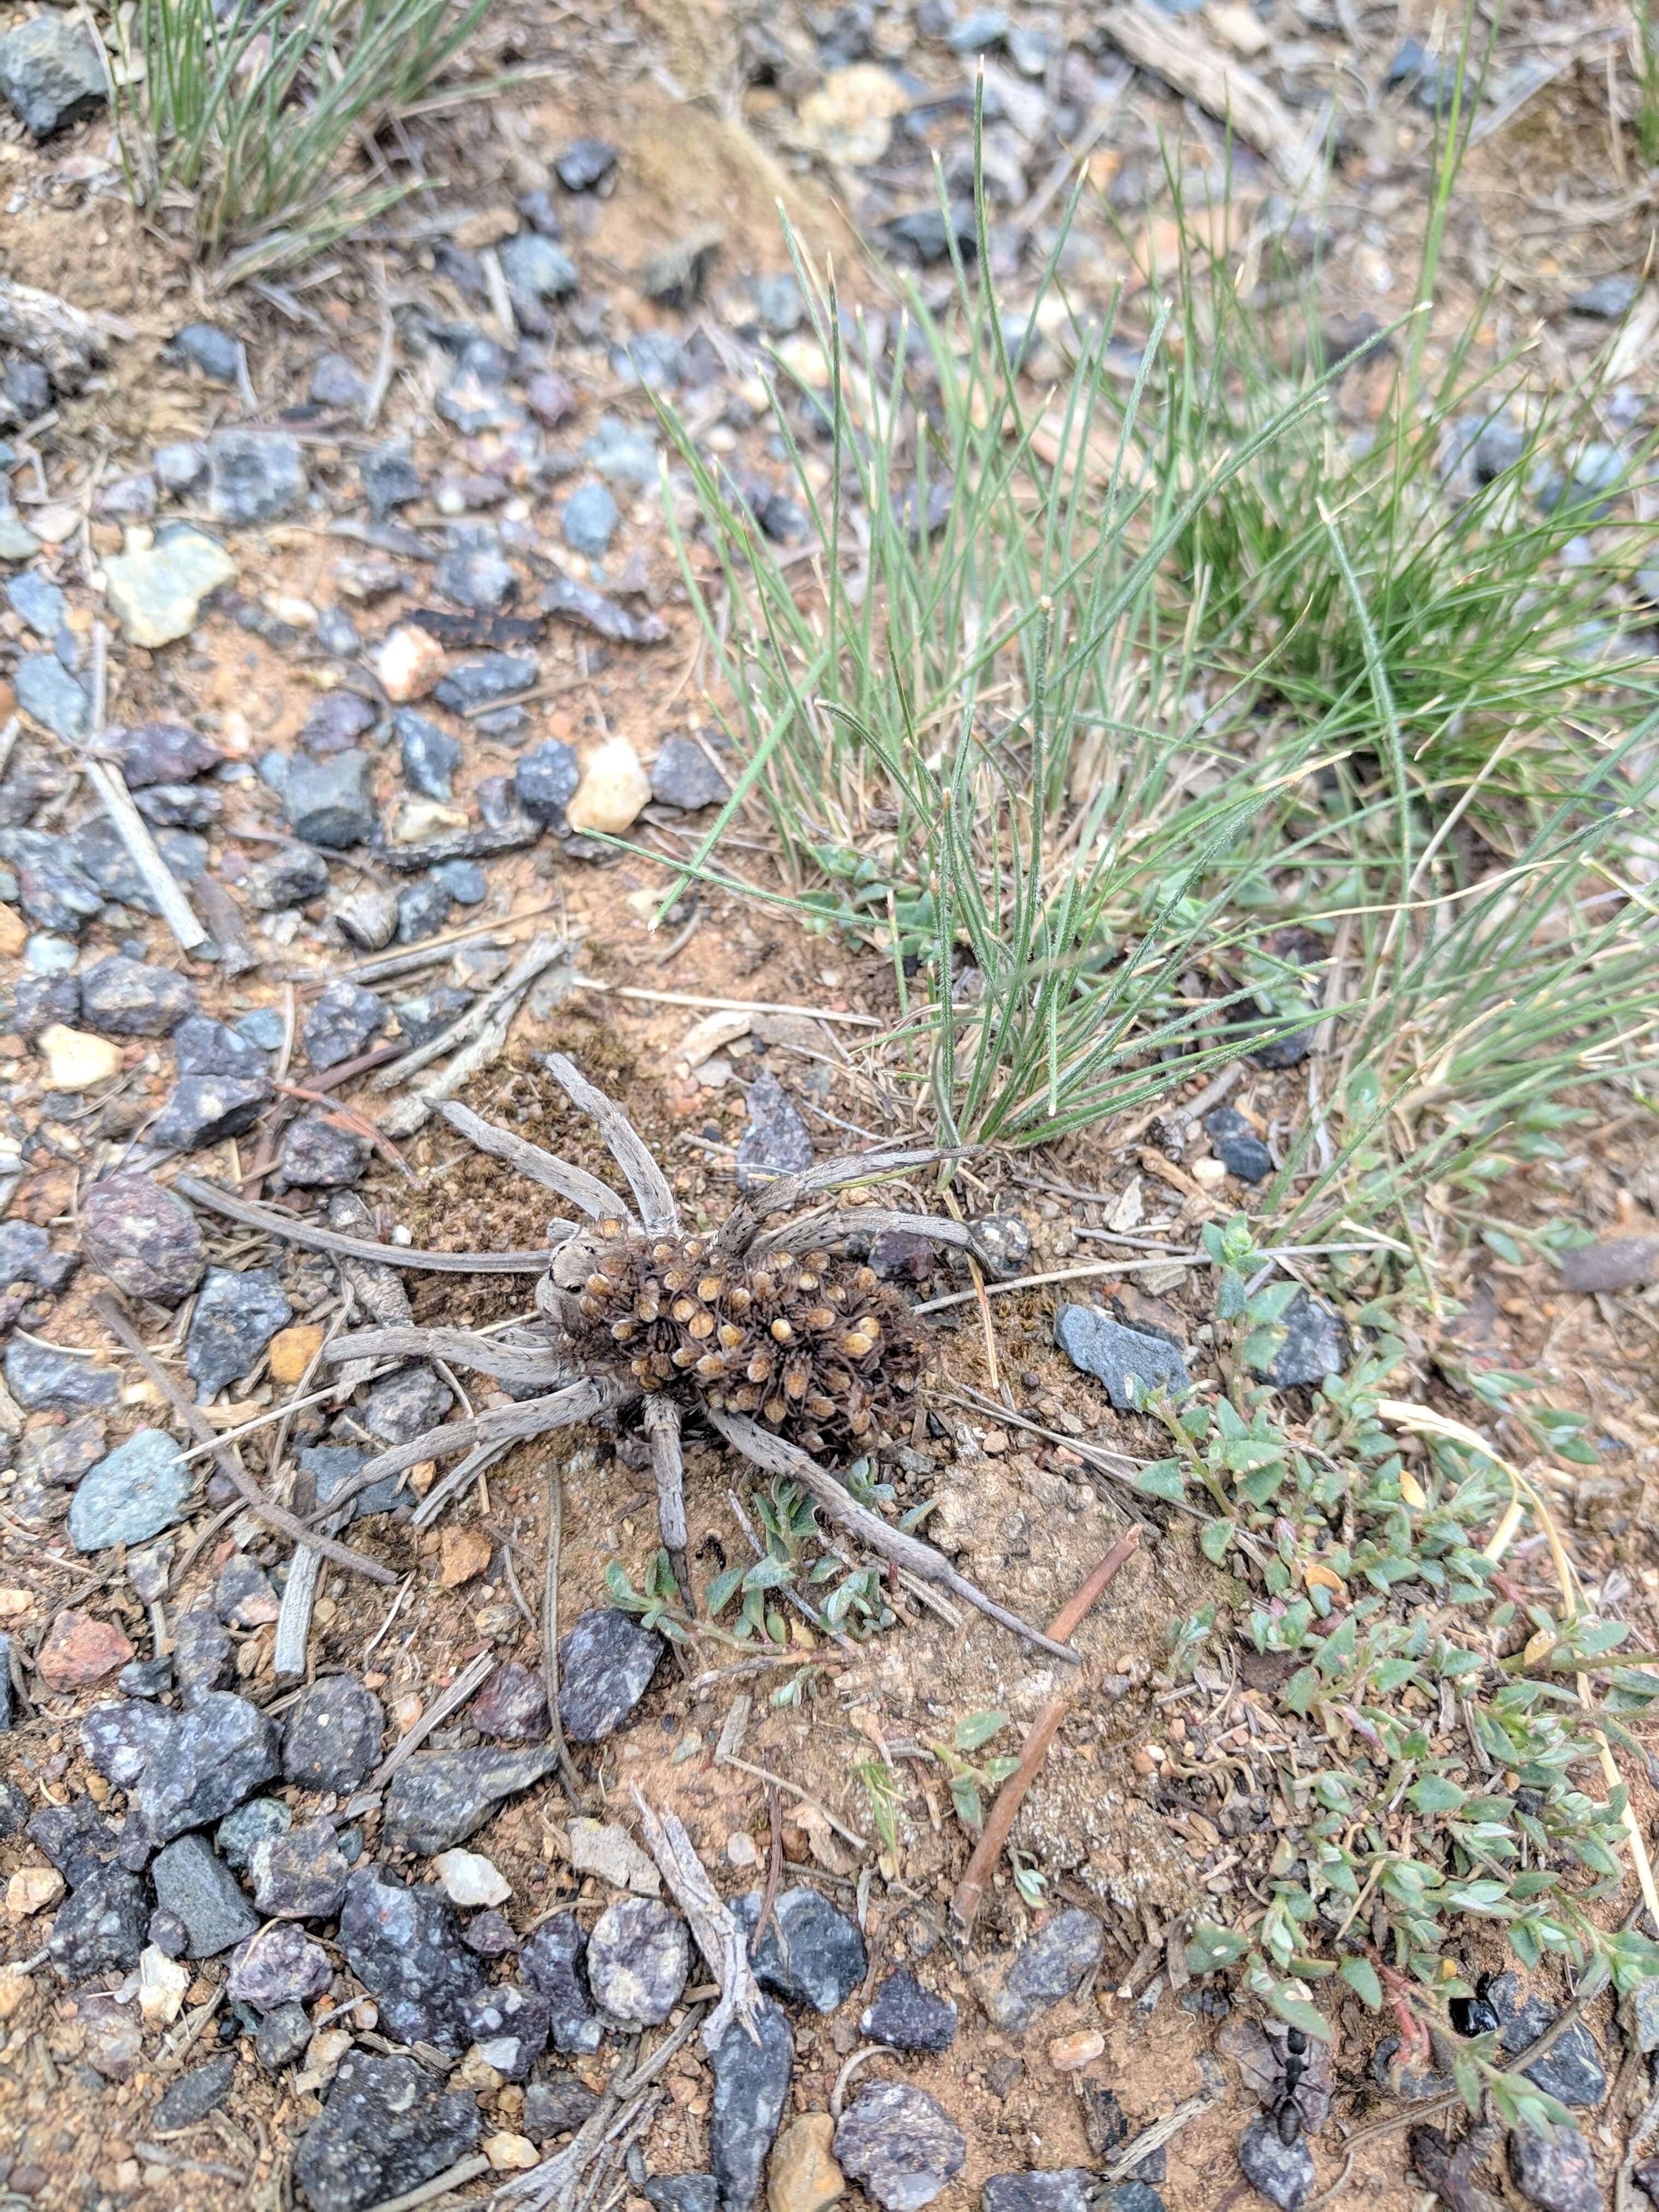 Wolf spider spotted with dozens of babies on her back